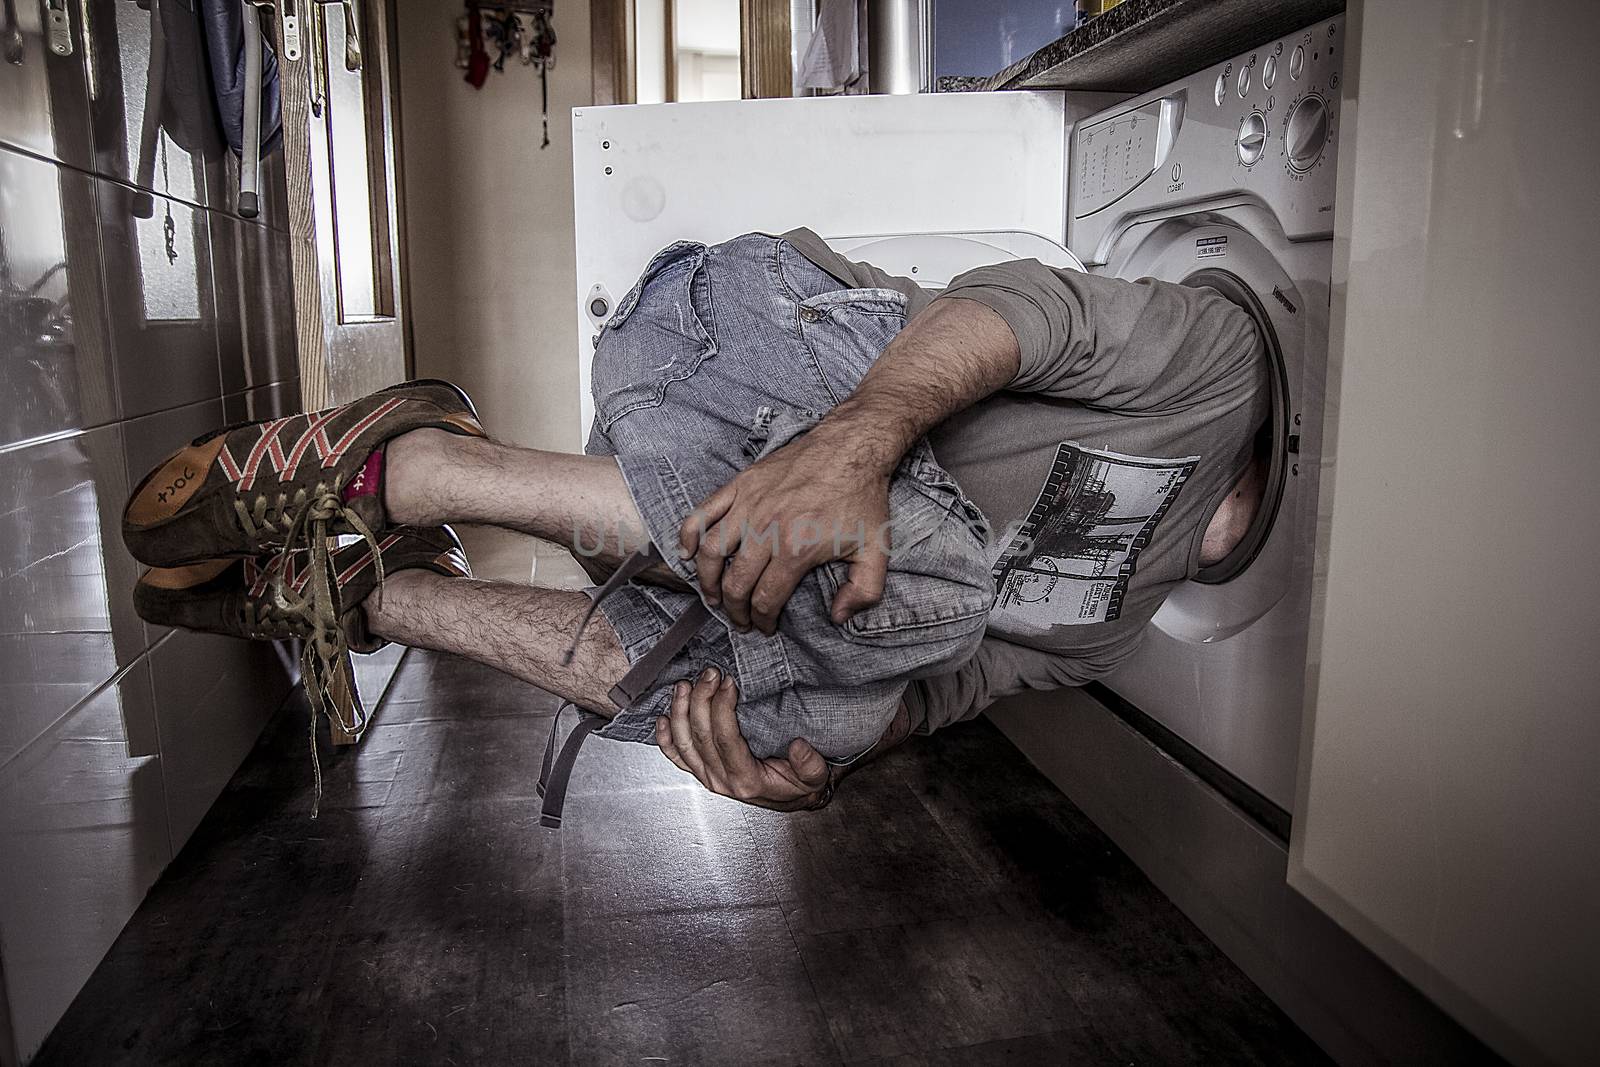 man flying with his head stuck in a washing machine by FernandoCortes